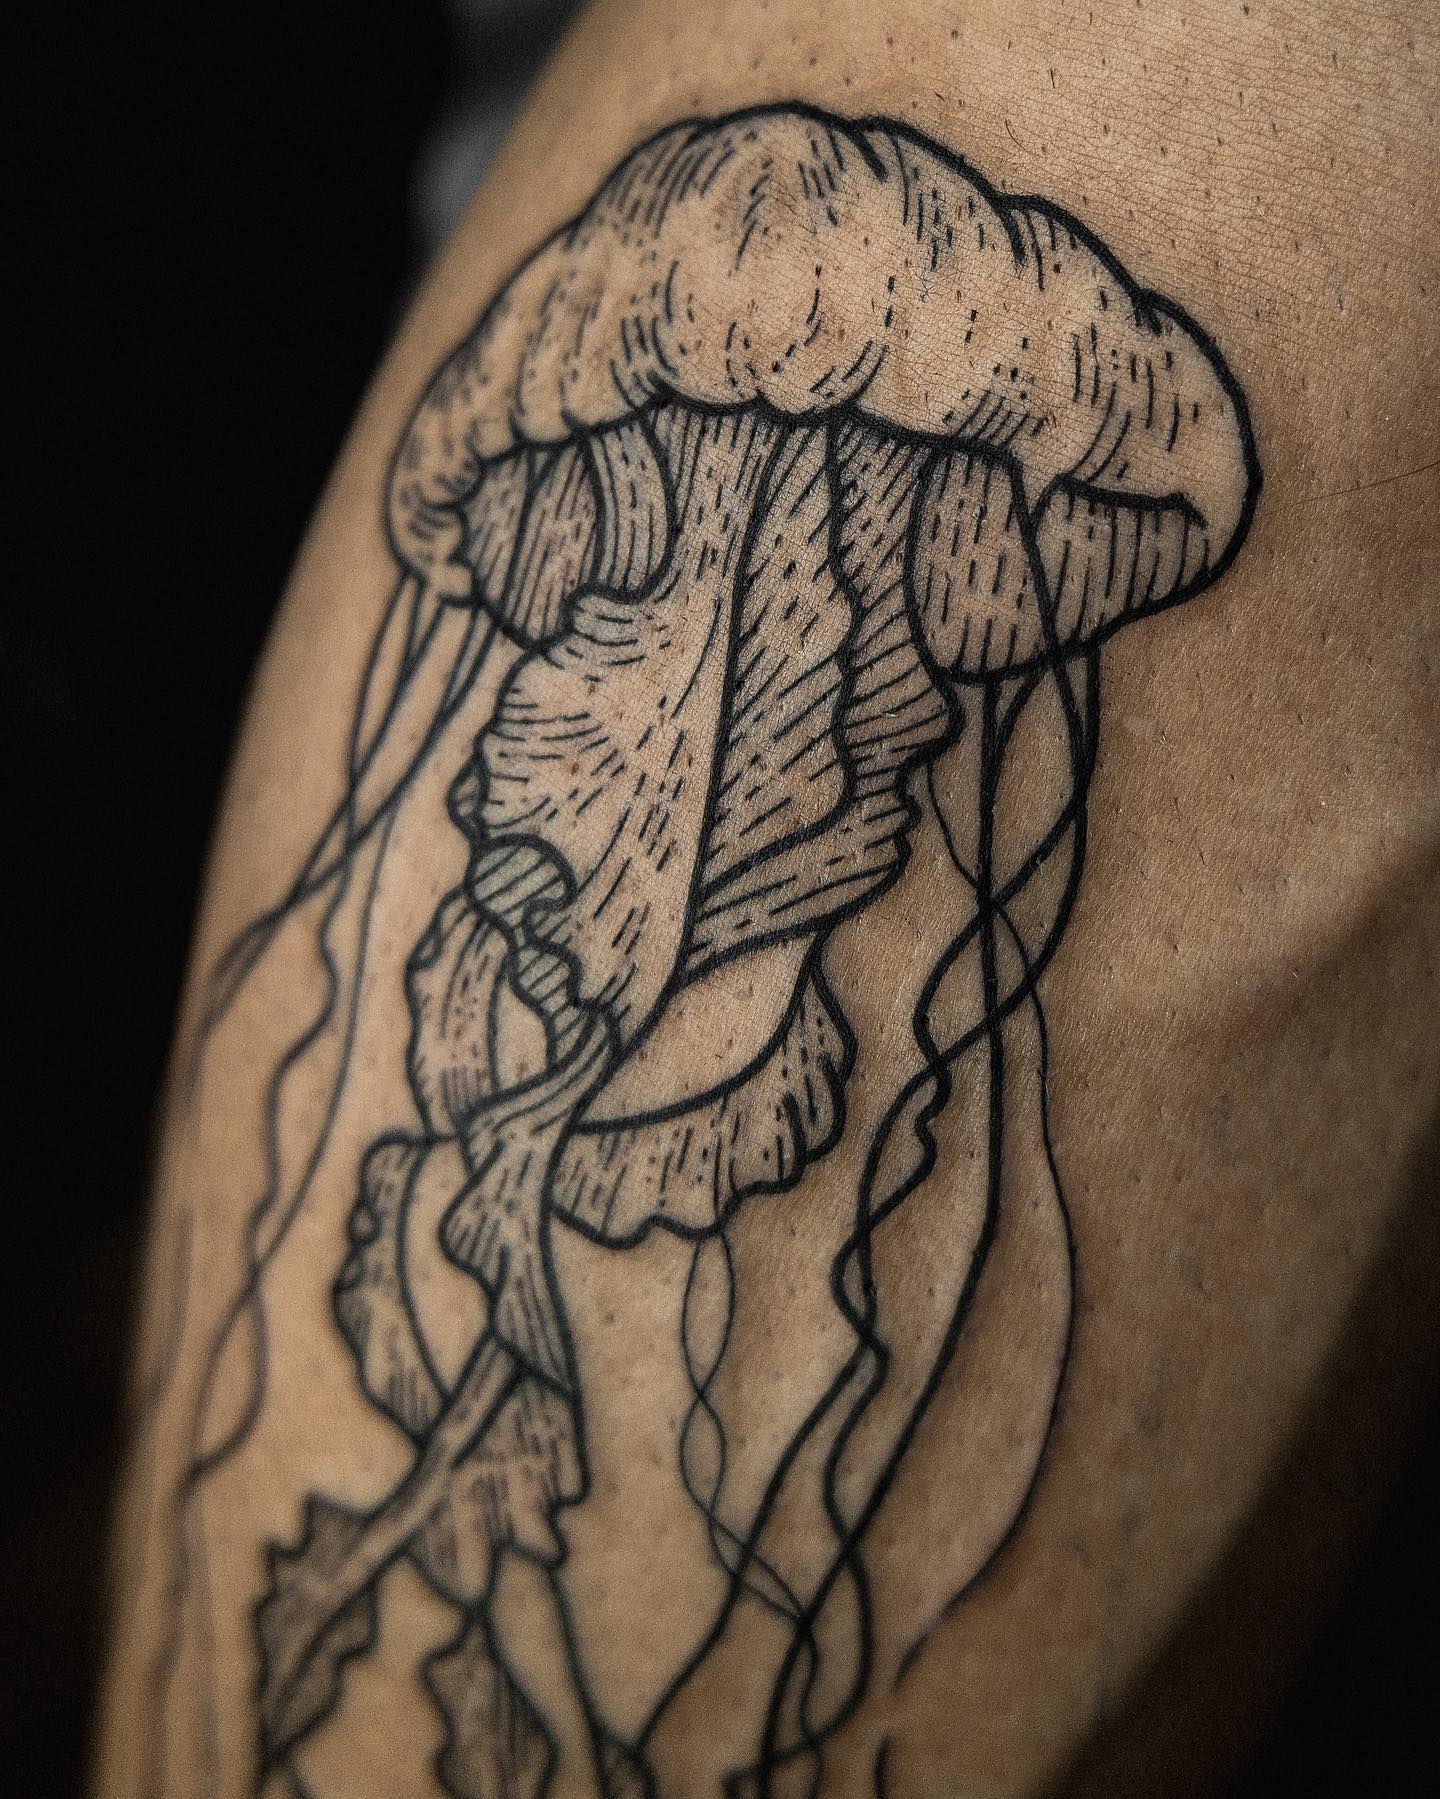 The Painted Lady Tattoo - Beautiful colors on this jellyfish tattoo by Nate  Brinker- @nate_brinker_tattoos. Want to schedule with Nate? Email him at  natebrinkerbooking@gmail.com. . . . . #jellyfishtattoo #tattoosleeve  #colortattoos #neotraditionaltattoo #